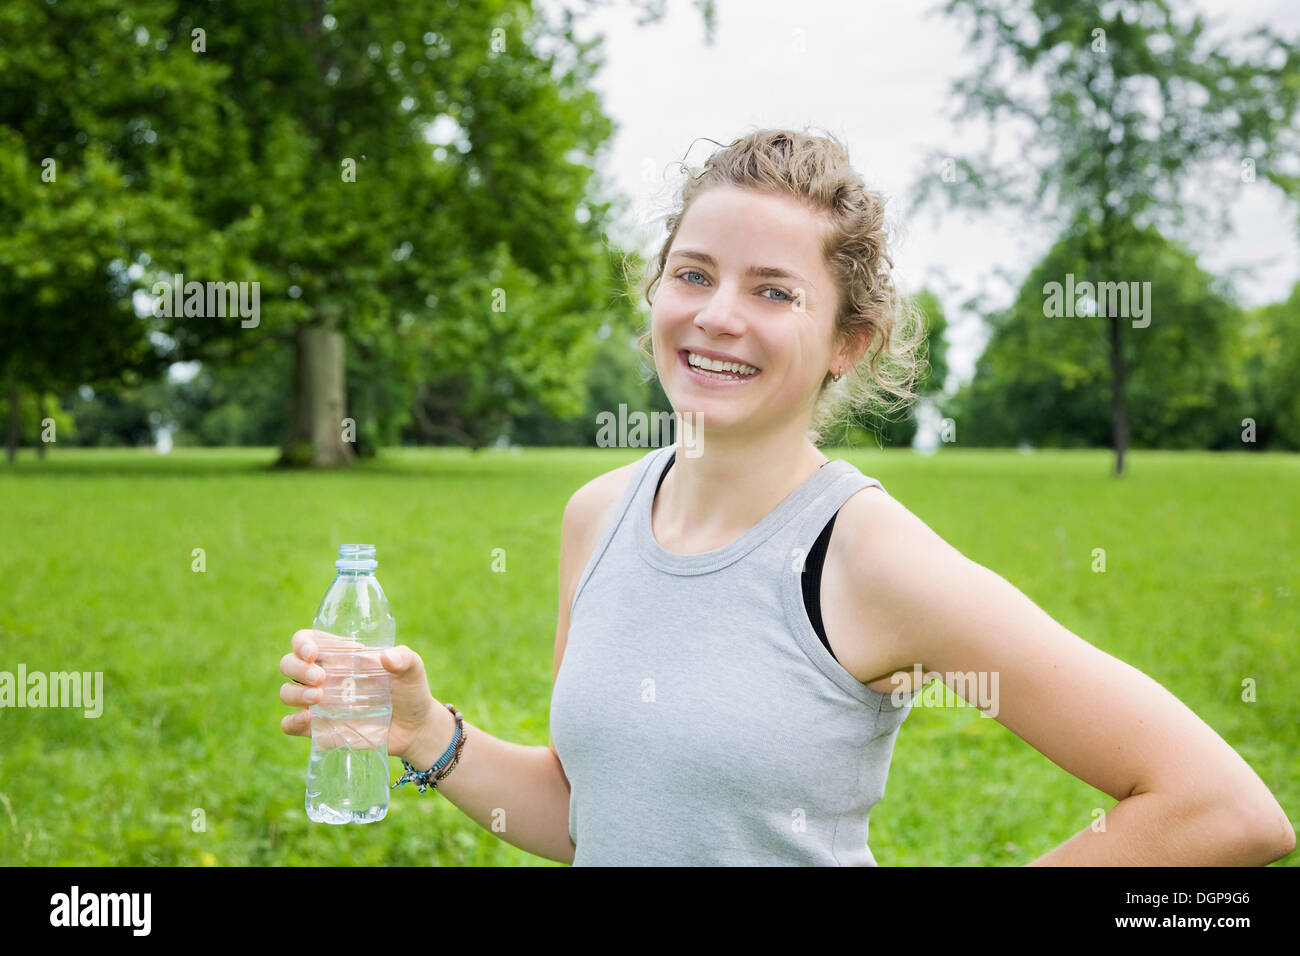 Young woman holding a bottle of mineral water, after working out Stock Photo